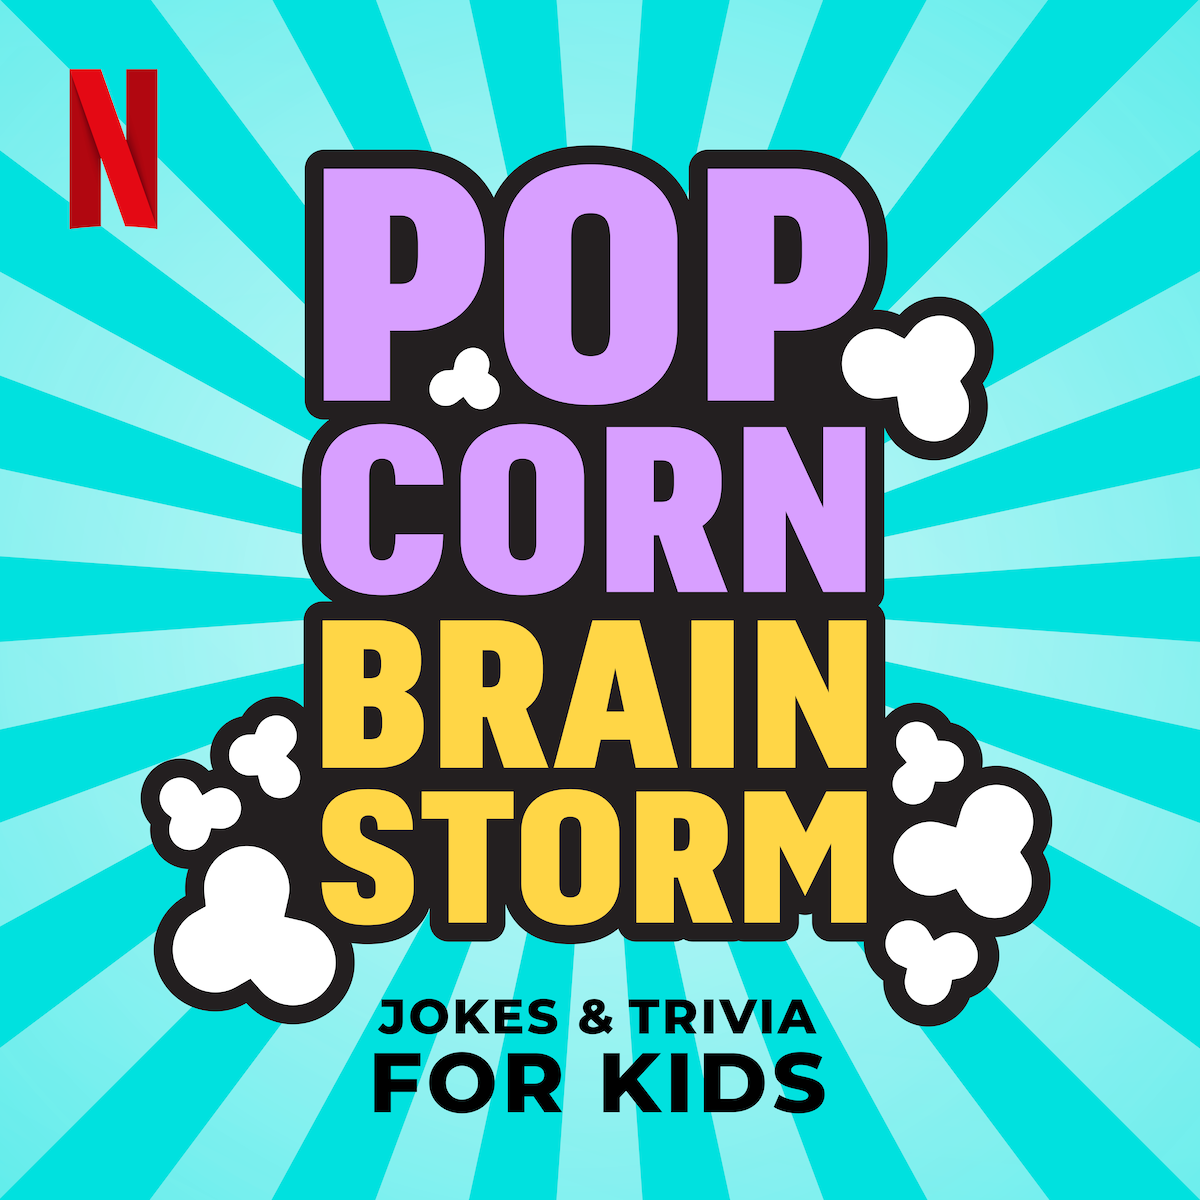 Popcorn Brainstorm! Jokes & Trivia for Kids key art, with the title of the podcast surrounded by little pieces of illustrated popped popcorn kernels